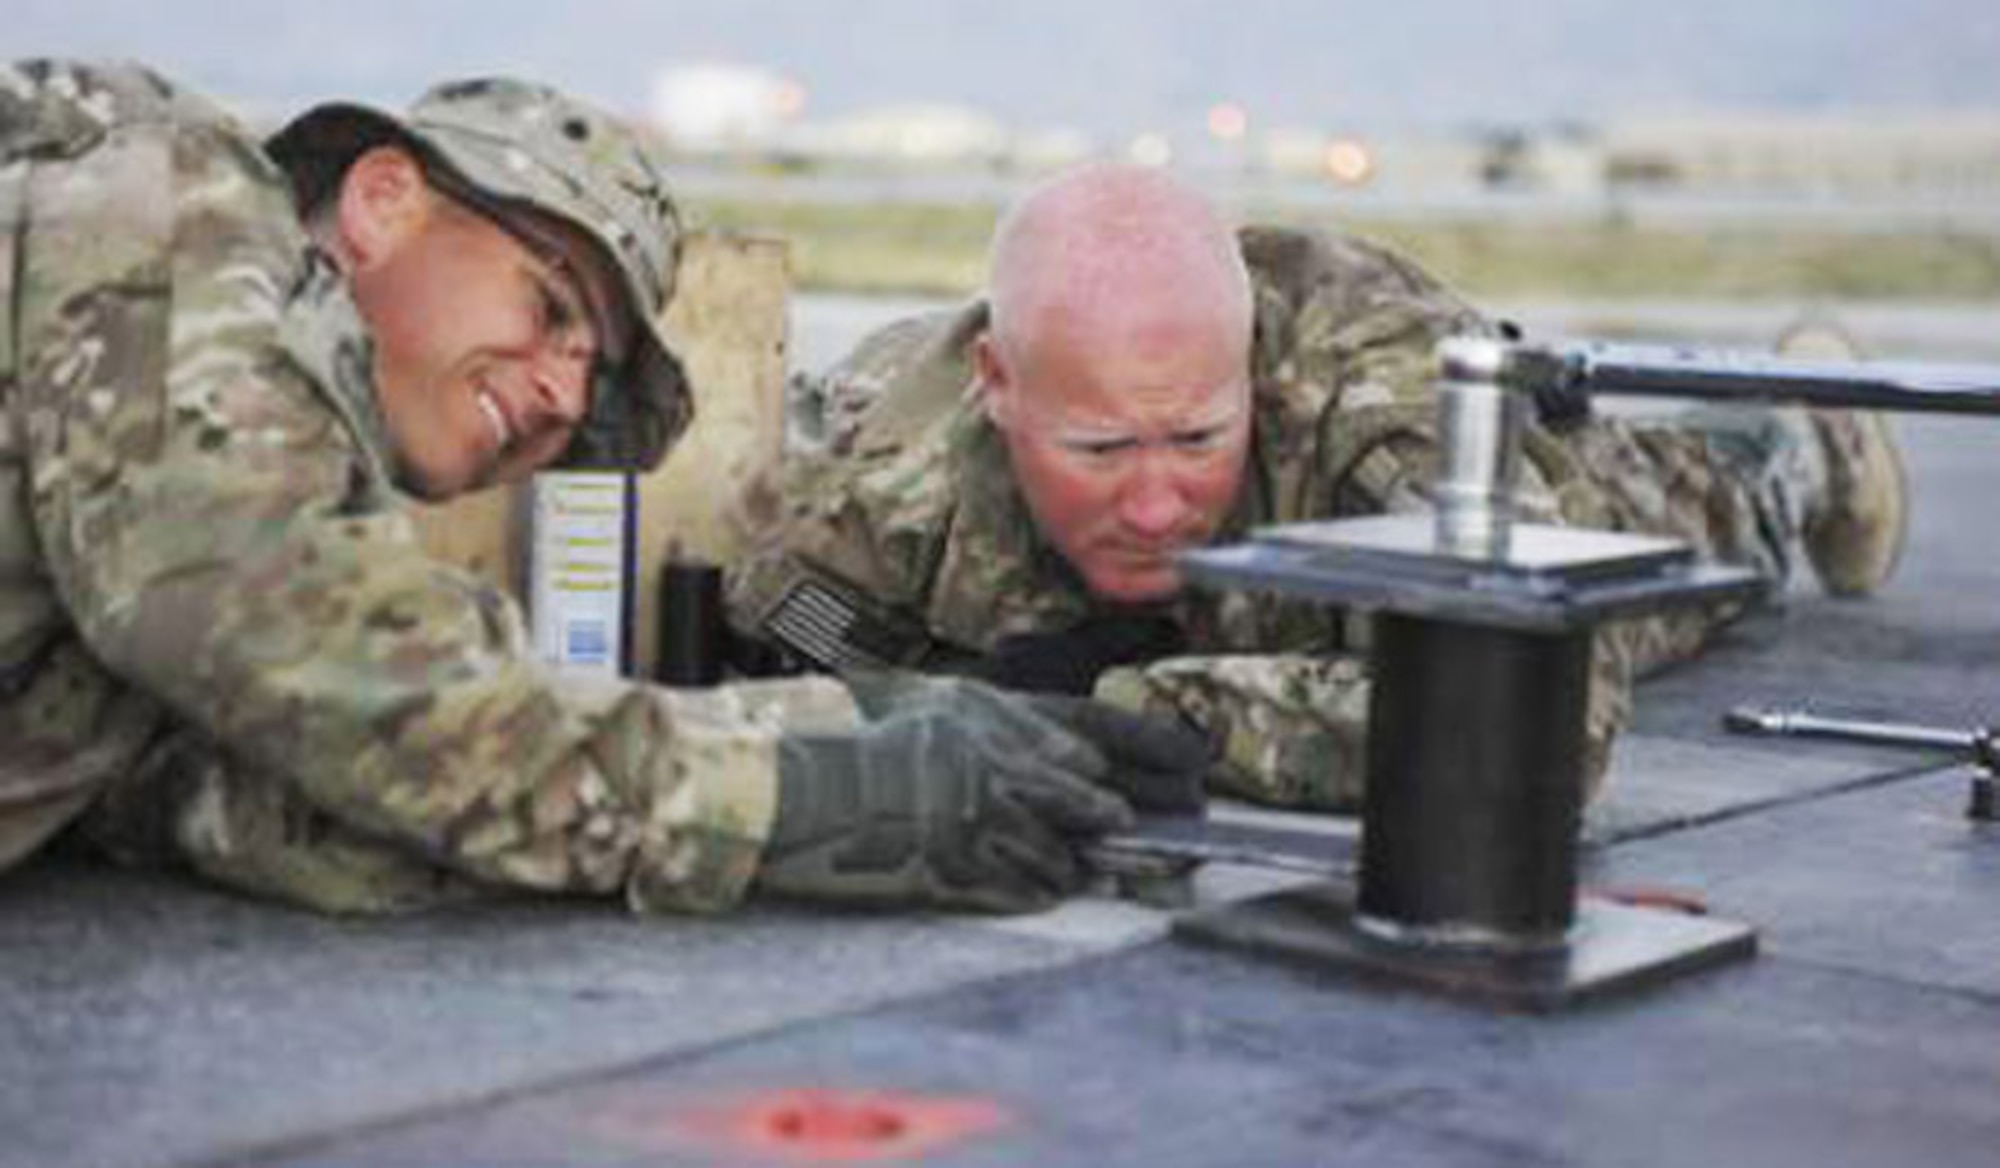 Maj. Ryan Kaspari, left, and Master Sgt. Jeremiah Graves conduct repairs on the main runway June 9, 2014, at Bagram Air Field, Afghanistan. Kaspari is the 455th Expeditionary Civil Engineer Squadron operations chief and Graves is the 455th ECES NCO in charge of operations. Both Airmen are deployed from the Air National Guard’s 148th Fighter Wing, Duluth, Minn. (U.S. Air Force photo/Airman 1st Class Bobby Cummings)